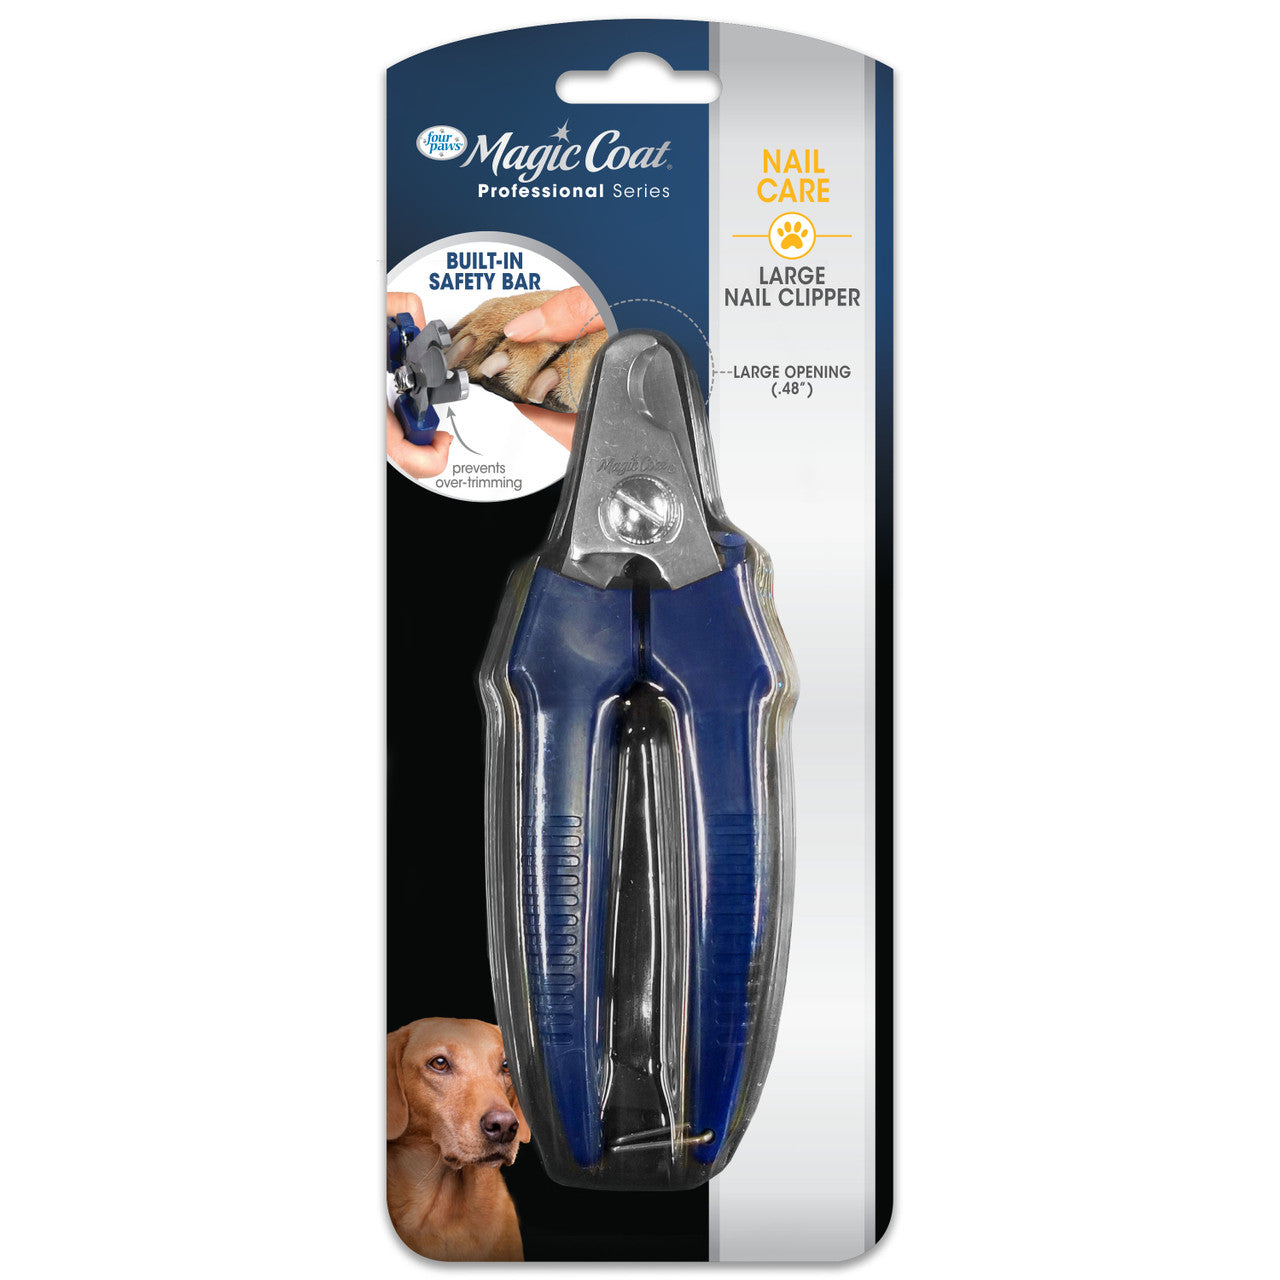 Four Paws Magic Coat Professional Series Large Nail Clipper for Dogs